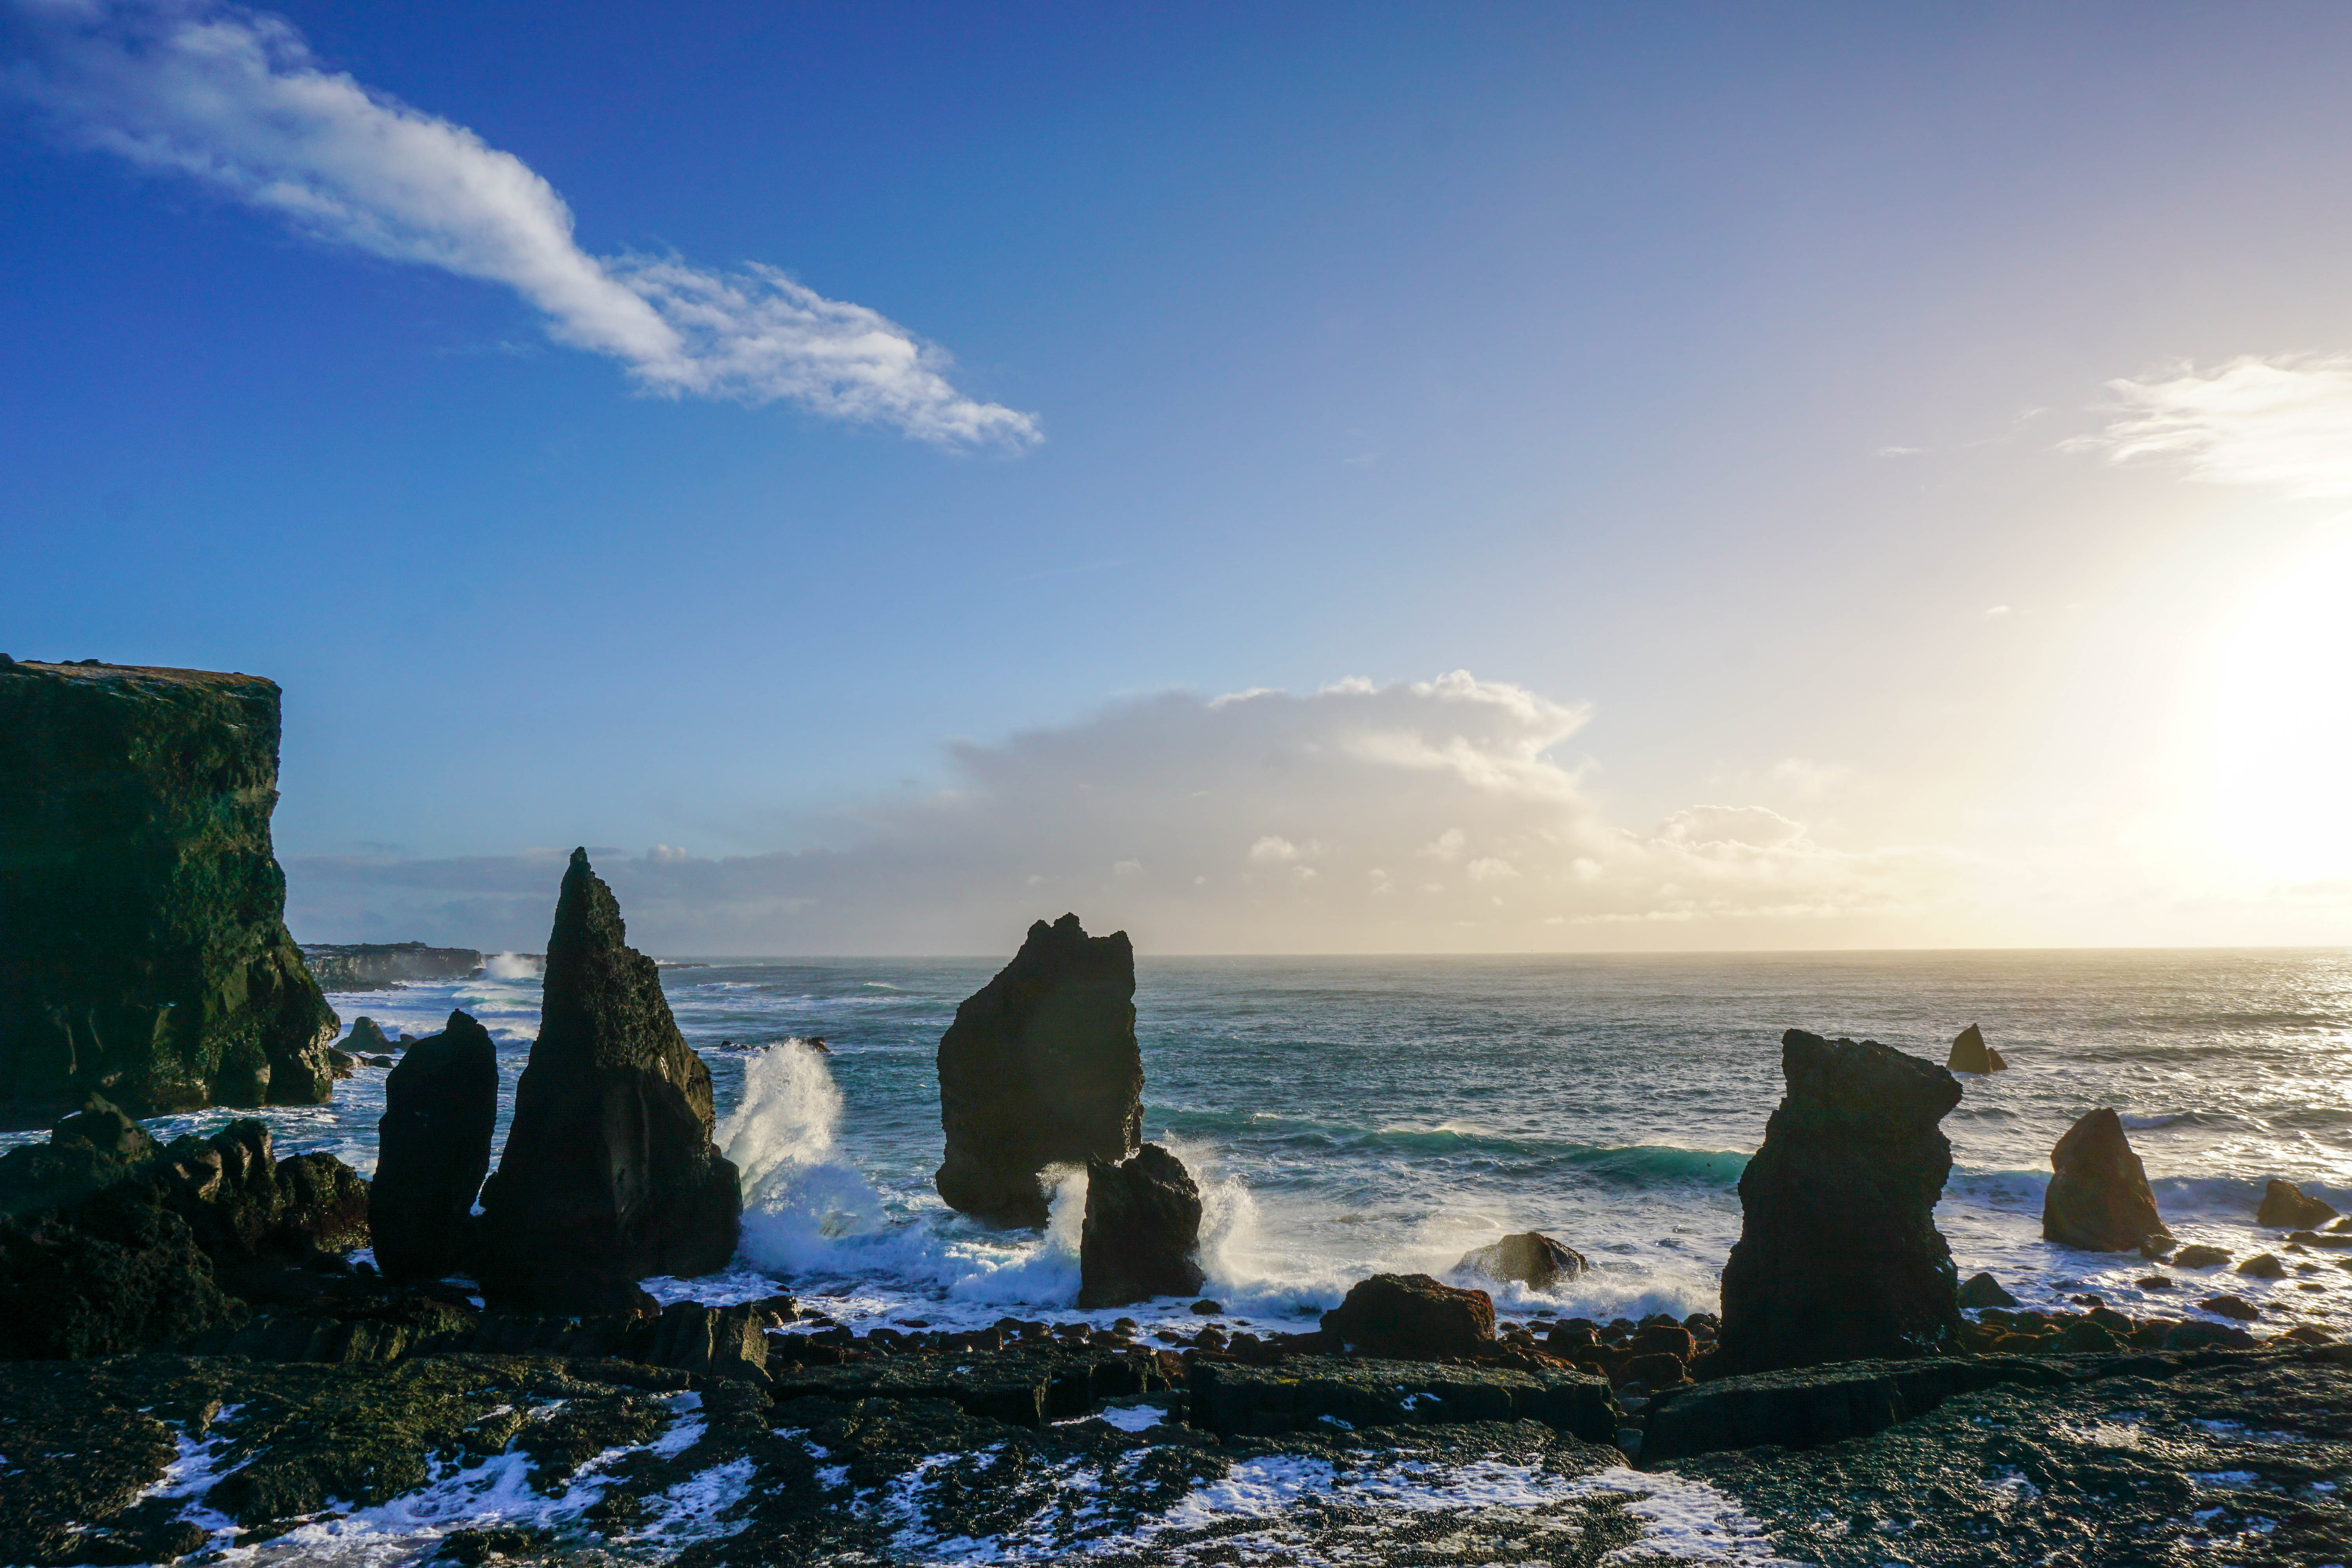 Reykjanesta on the Reykjanes peninsula | Life With a View